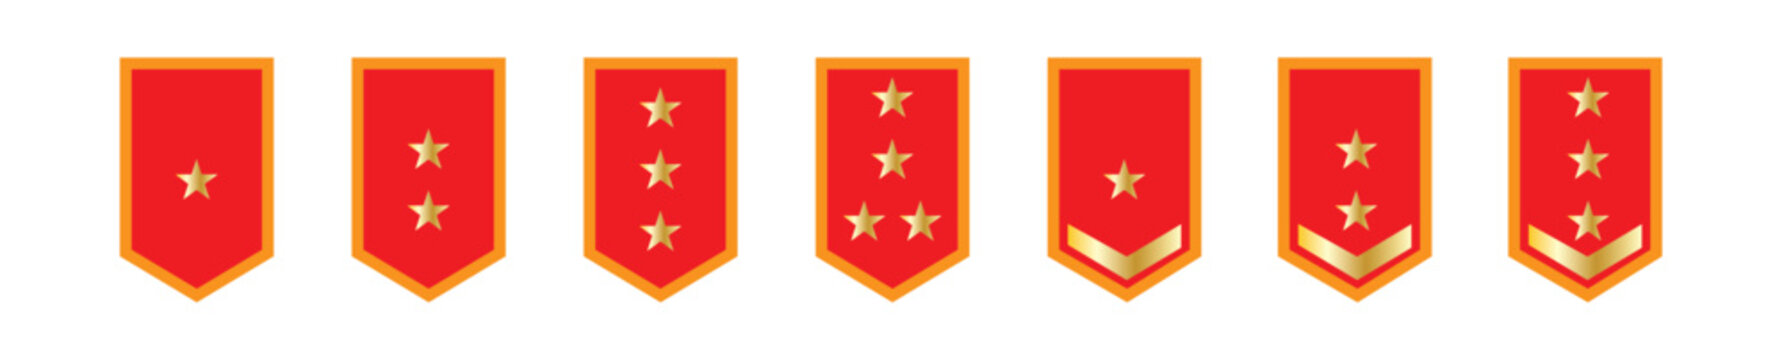 Army Rank Icon. Military Badge Symbol. Chevron Yellow Star and Stripes Logo. Soldier Sergeant, Major, Officer, General, Lieutenant, Colonel Emblem. Isolated Vector Illustration